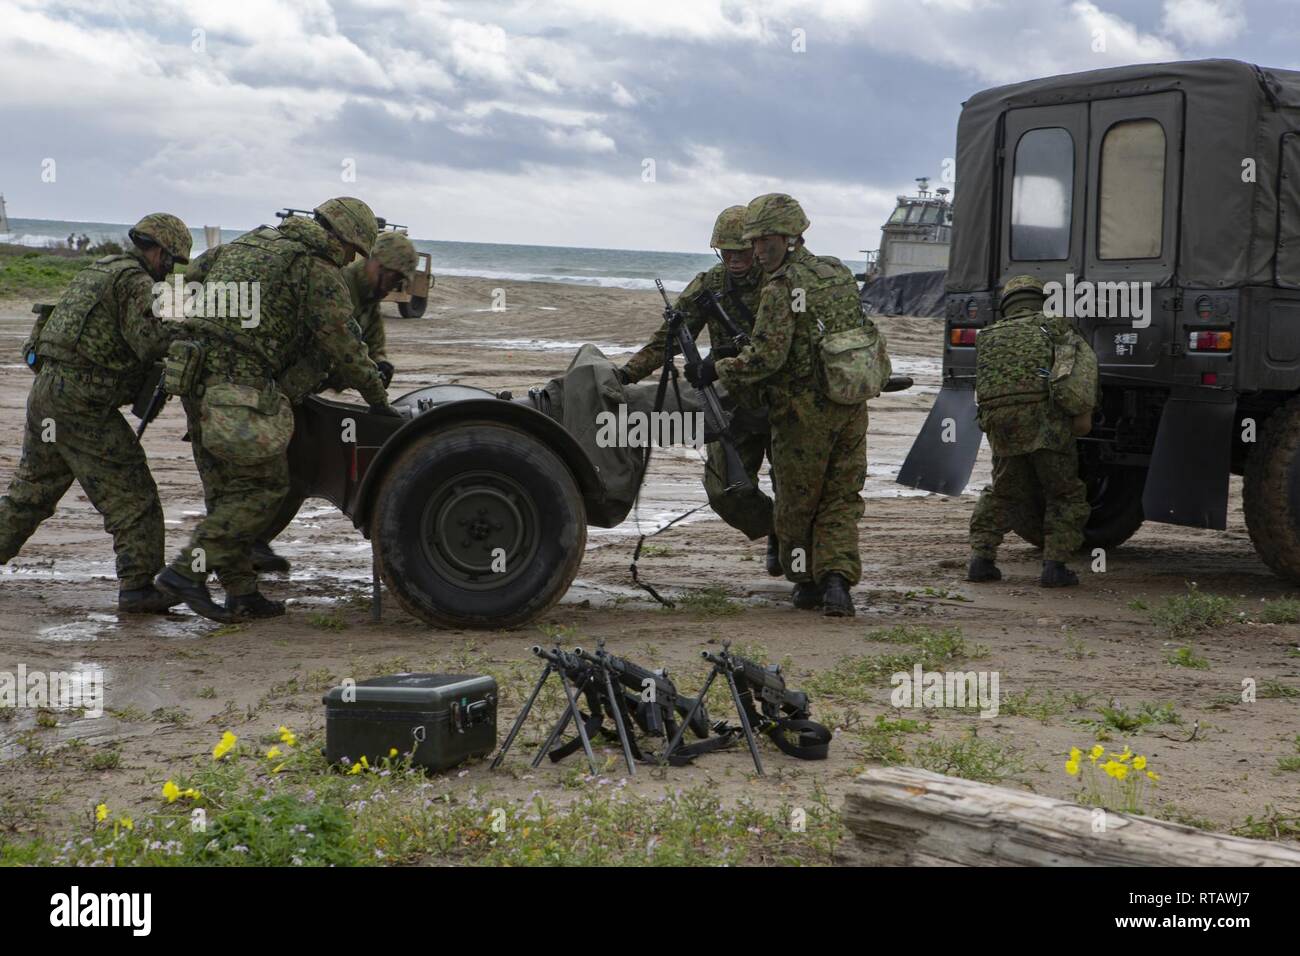 Japan Ground Self-Defense Force (JGSDF) Soldiers begin to set up a mortar trailer during an amphibious landing exercise for Iron Fist 2019, Feb. 4, on U.S. Marine Corps Base Camp Pendleton, CA. Exercise Iron Fist is an annual, multilateral training exercise where U.S. and Japanese service members train together and share techniques, tactics and procedures to improve their combined operational capabilities. Stock Photo